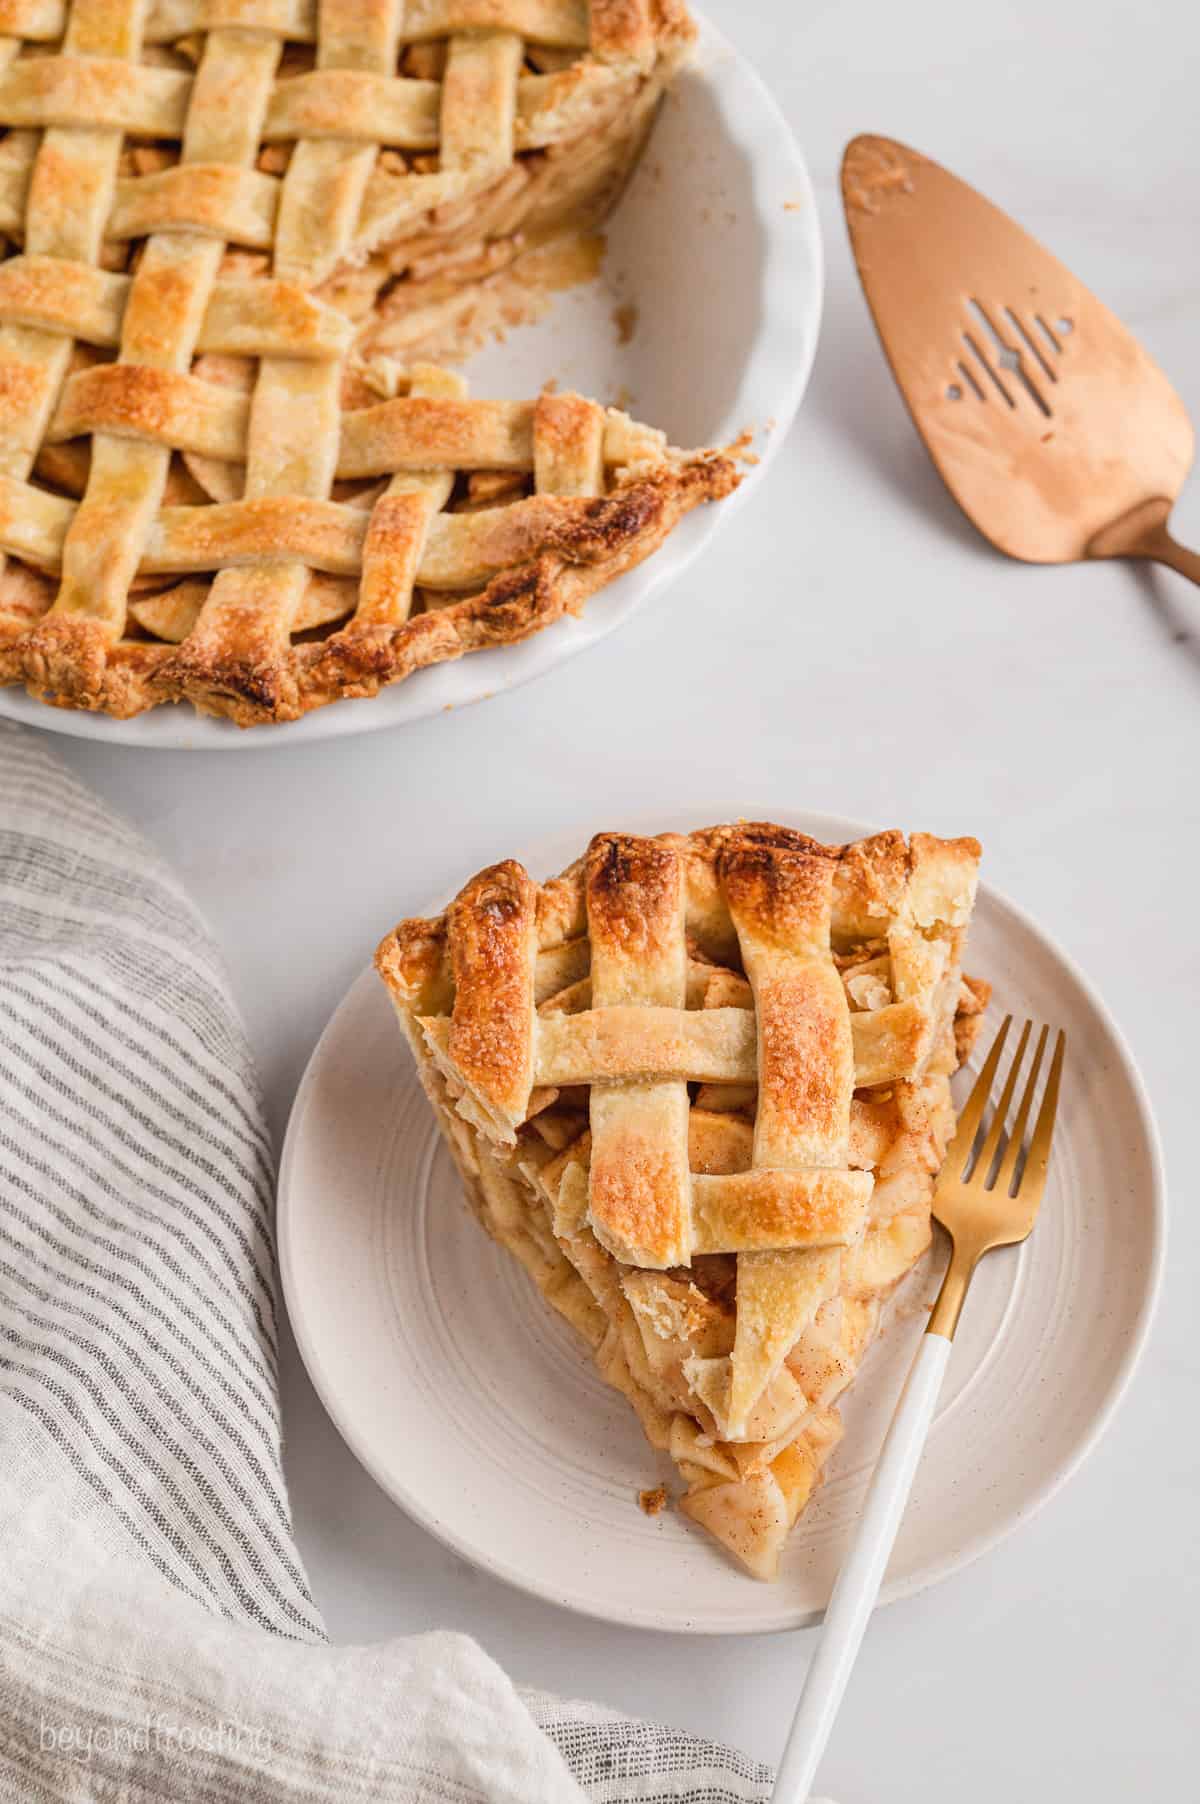 A slice of pie with a lattice crust on a white plate, with the rest of the pie in the background.